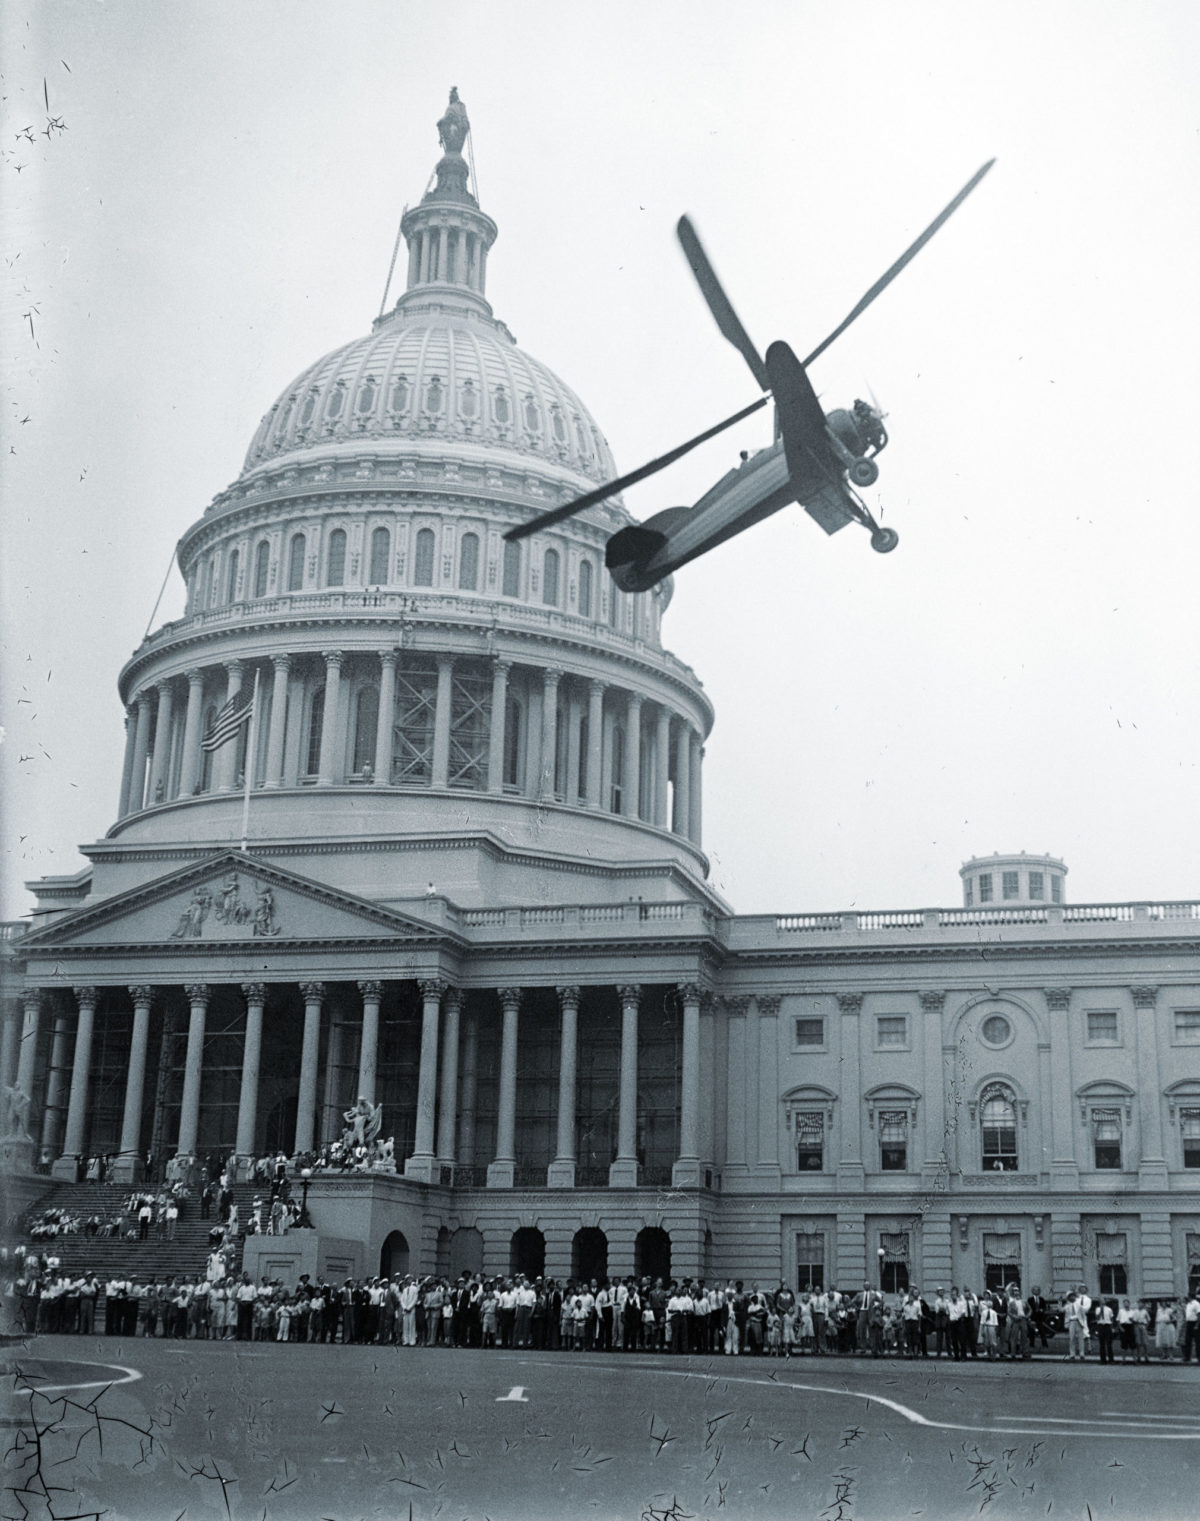 A plane at the capitol | HistoryNet